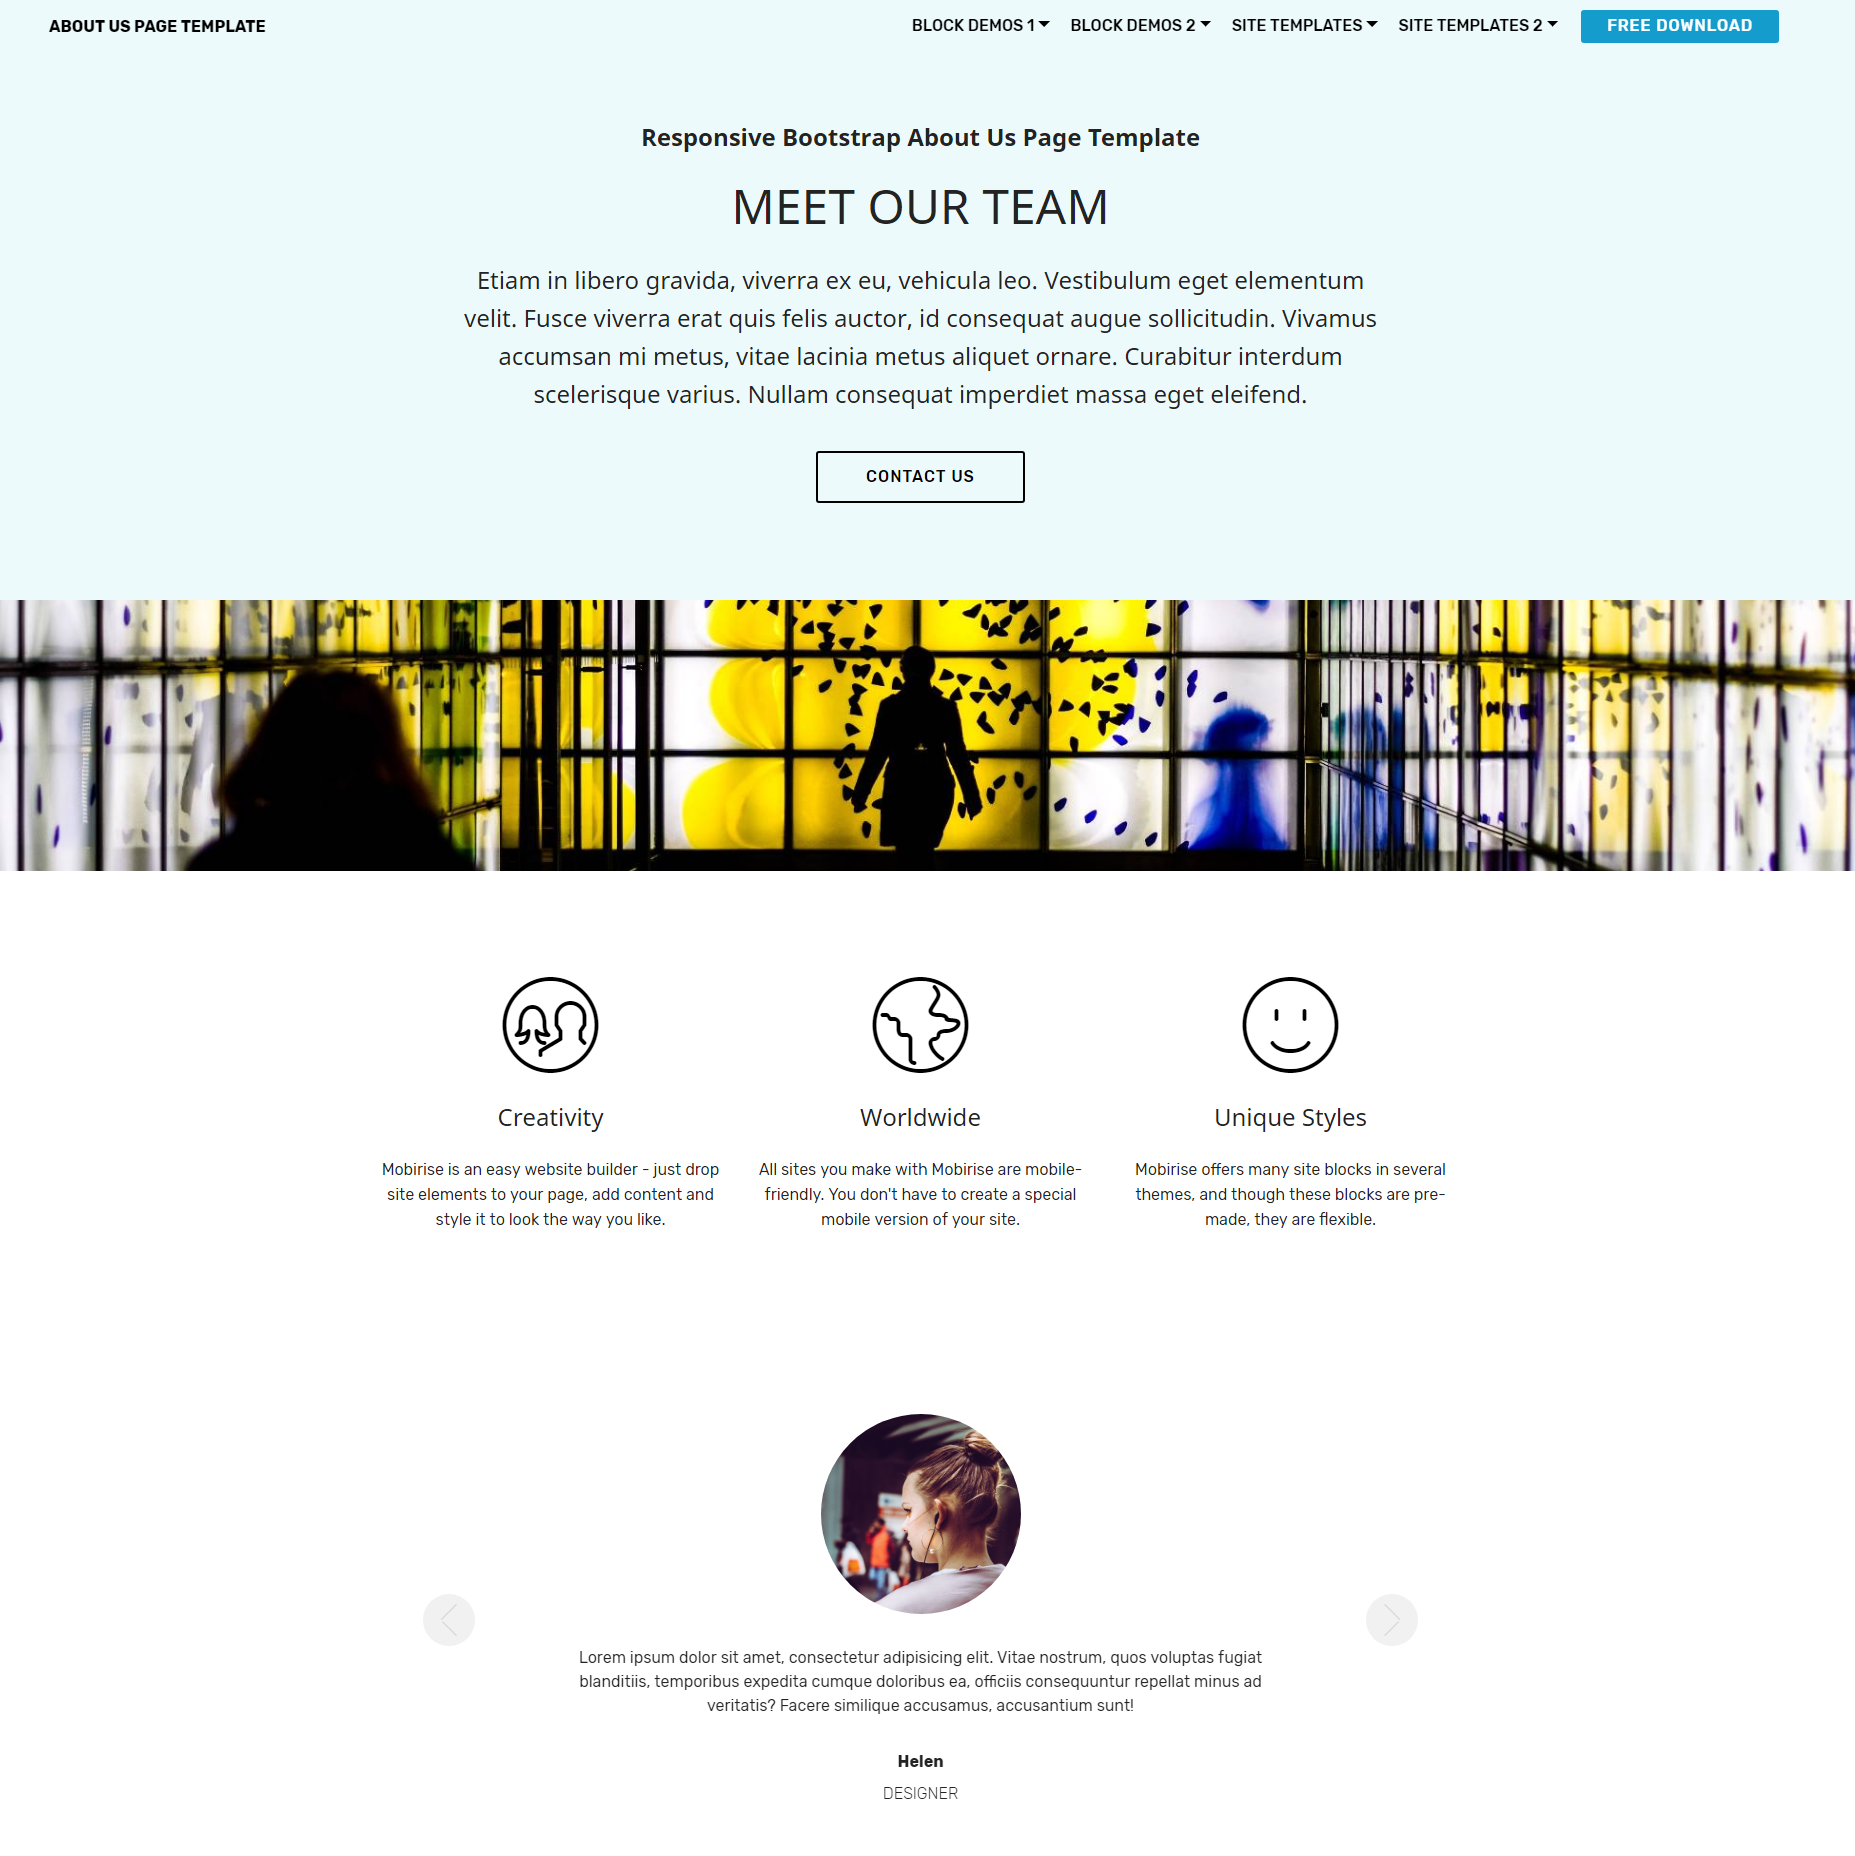 Responsive Bootstrap About Us Templates